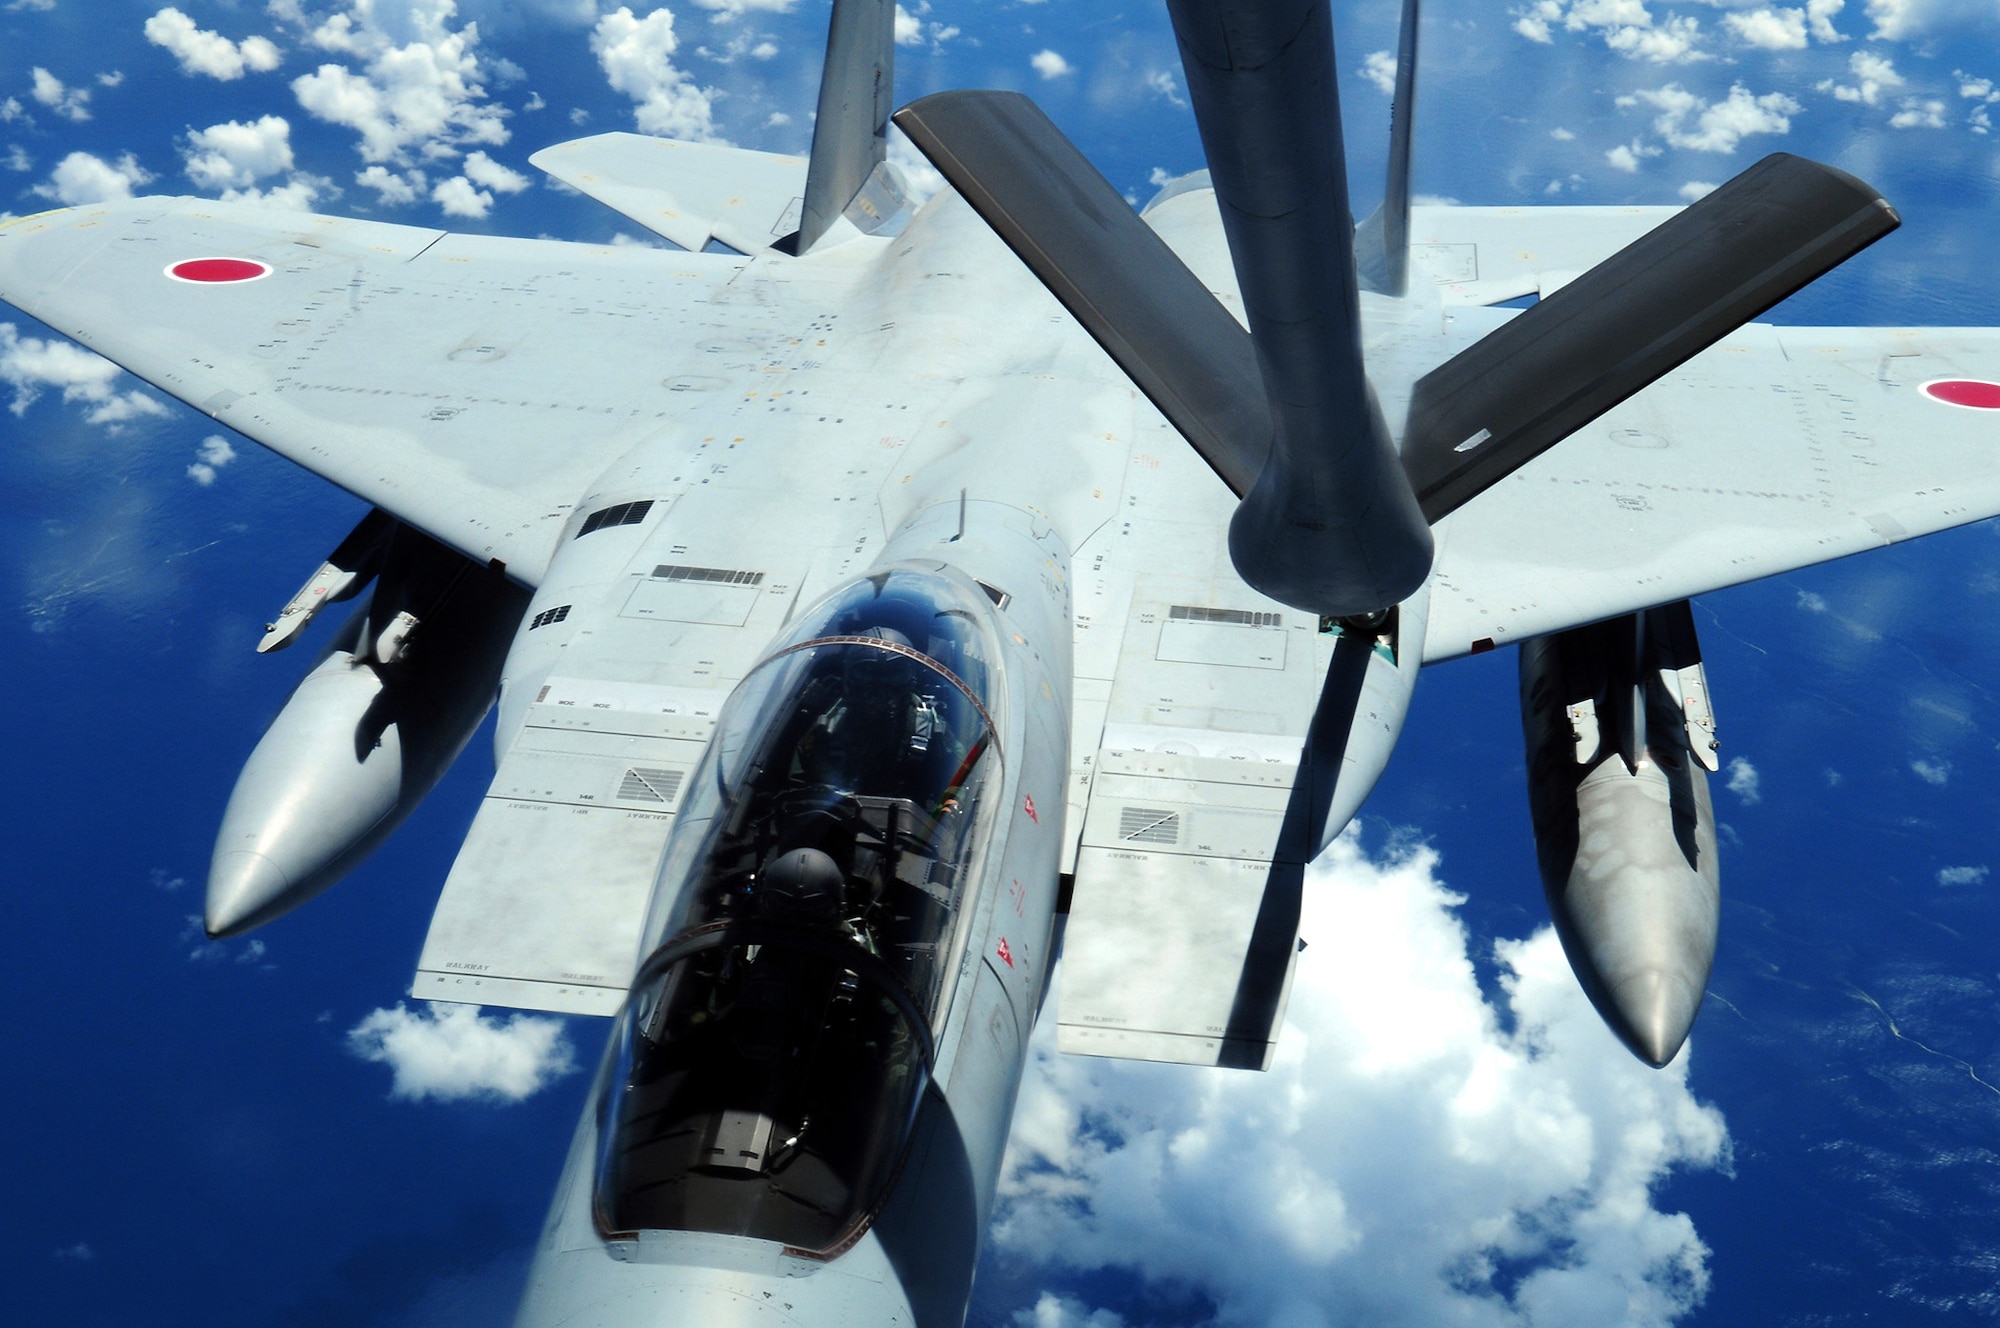 A Japan Air Self Defense Force F-15 is refueled by a U.S. Air Force KC-135 Stratotanker during air refueling training July 30 off the coast of Japan. The training is in preparation for JASDF participation in Red Flag-Alaska. The KC-135 is from the 909th Air Refueling Squadron, Kadena Air Base, Japan. (U.S. Air Force photo/Tech. Sgt. Angelique Perez) 